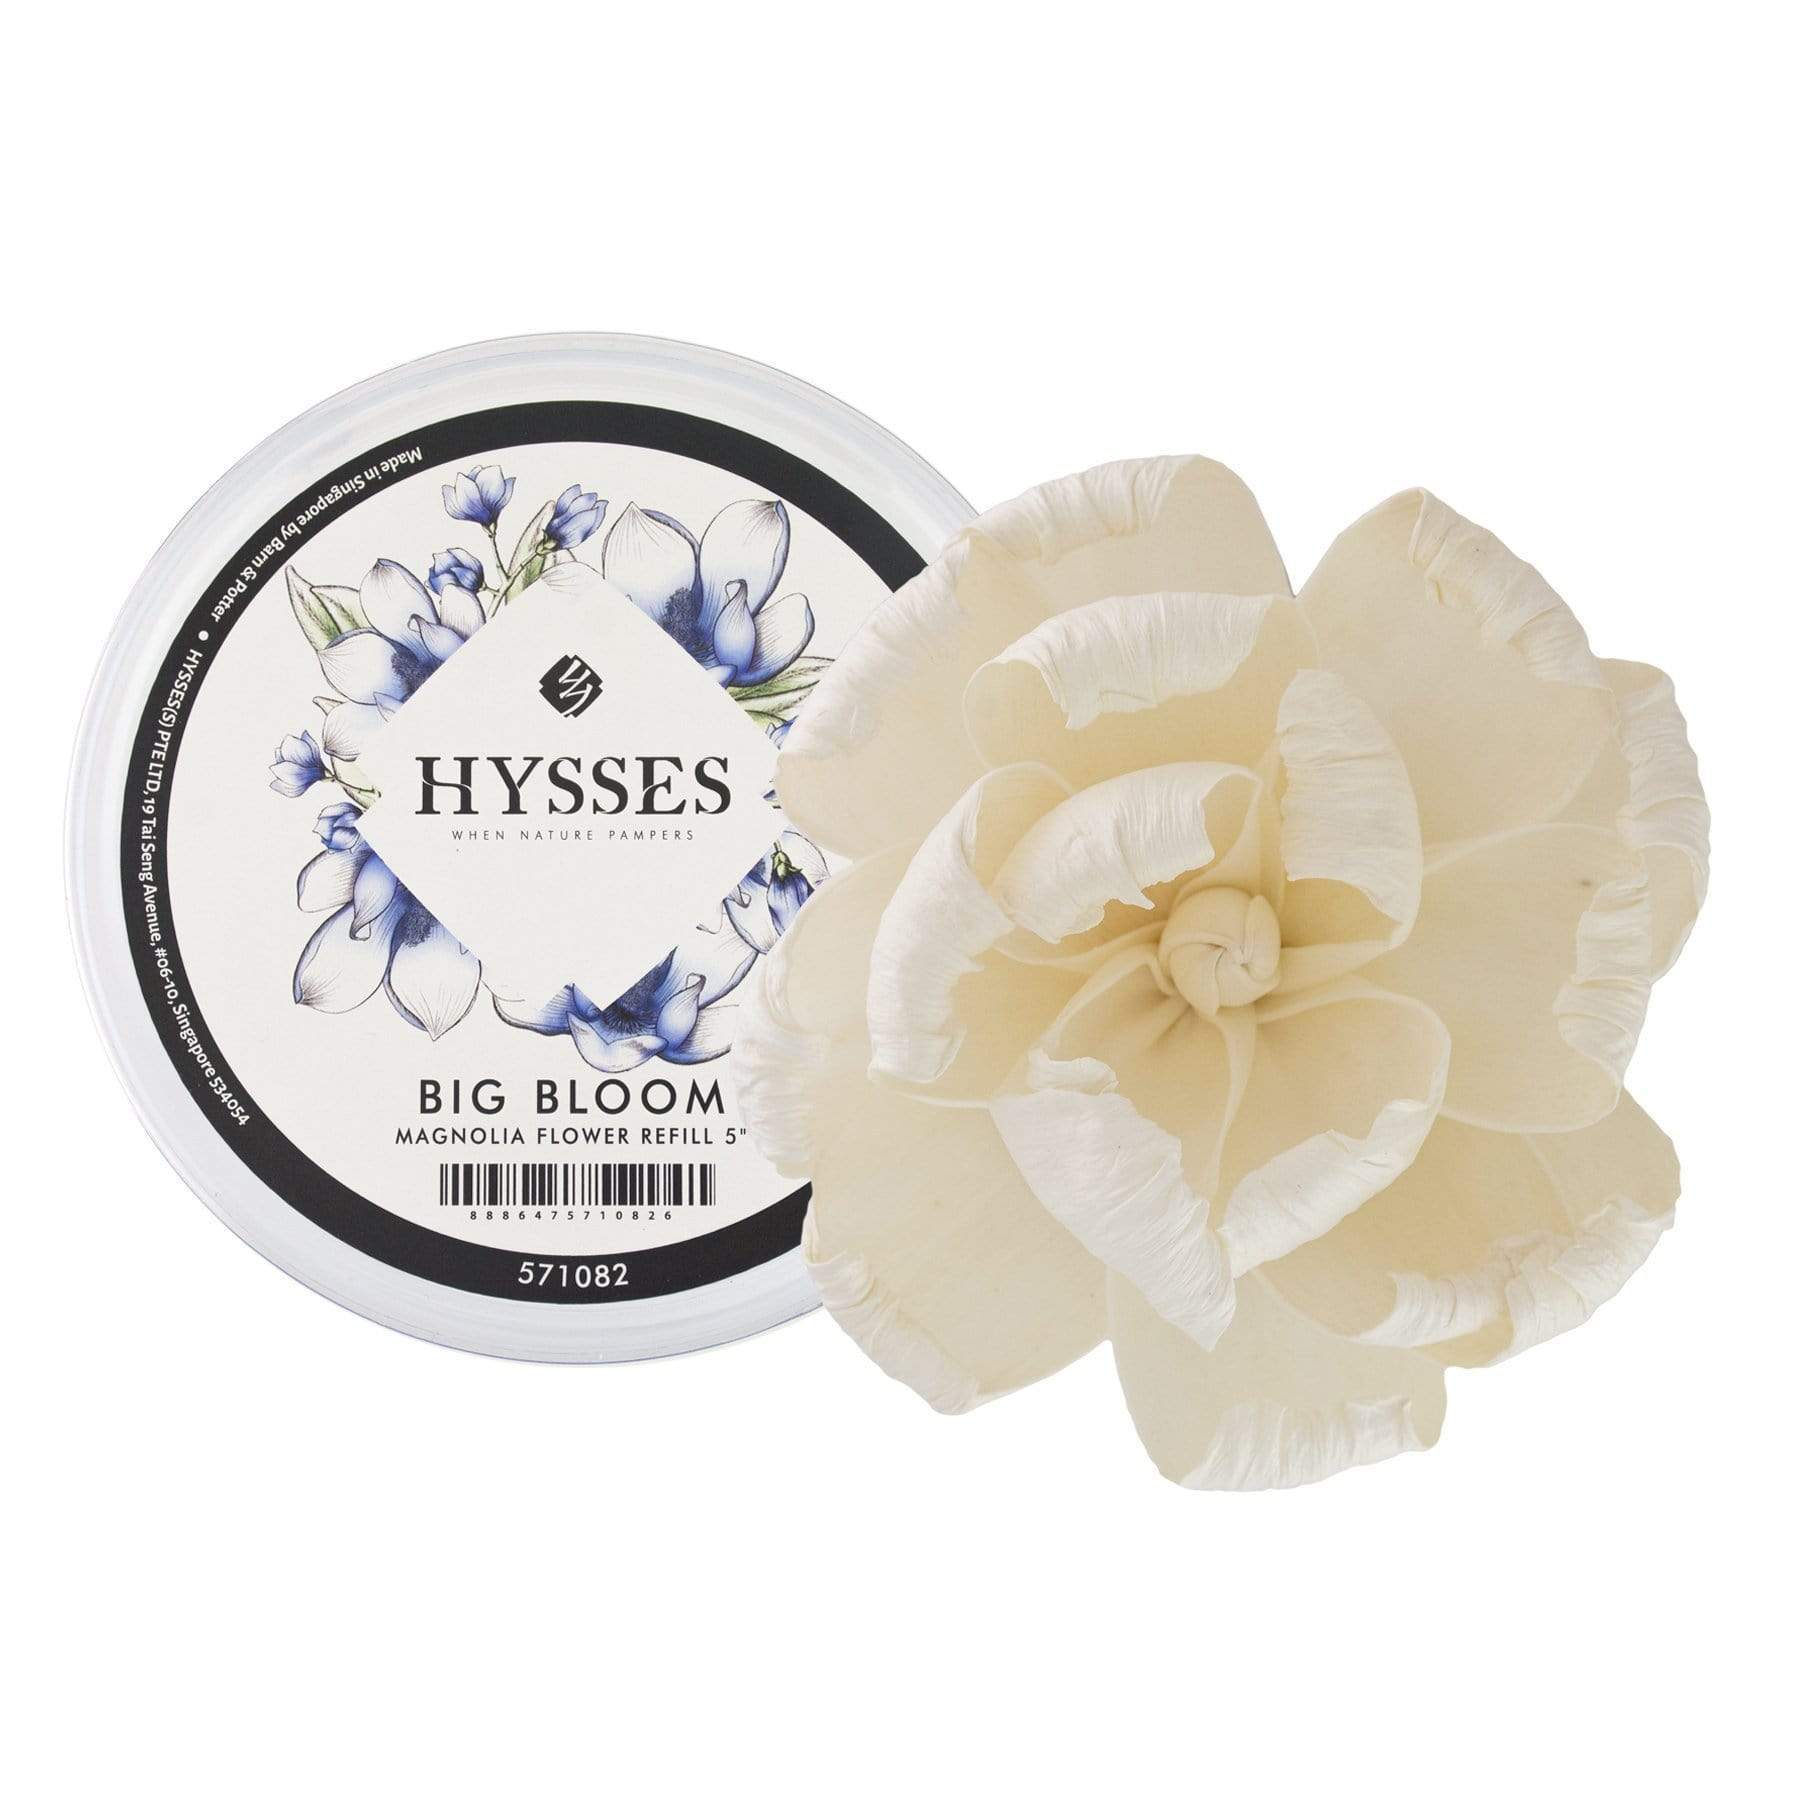 HYSSES Home Scents 5